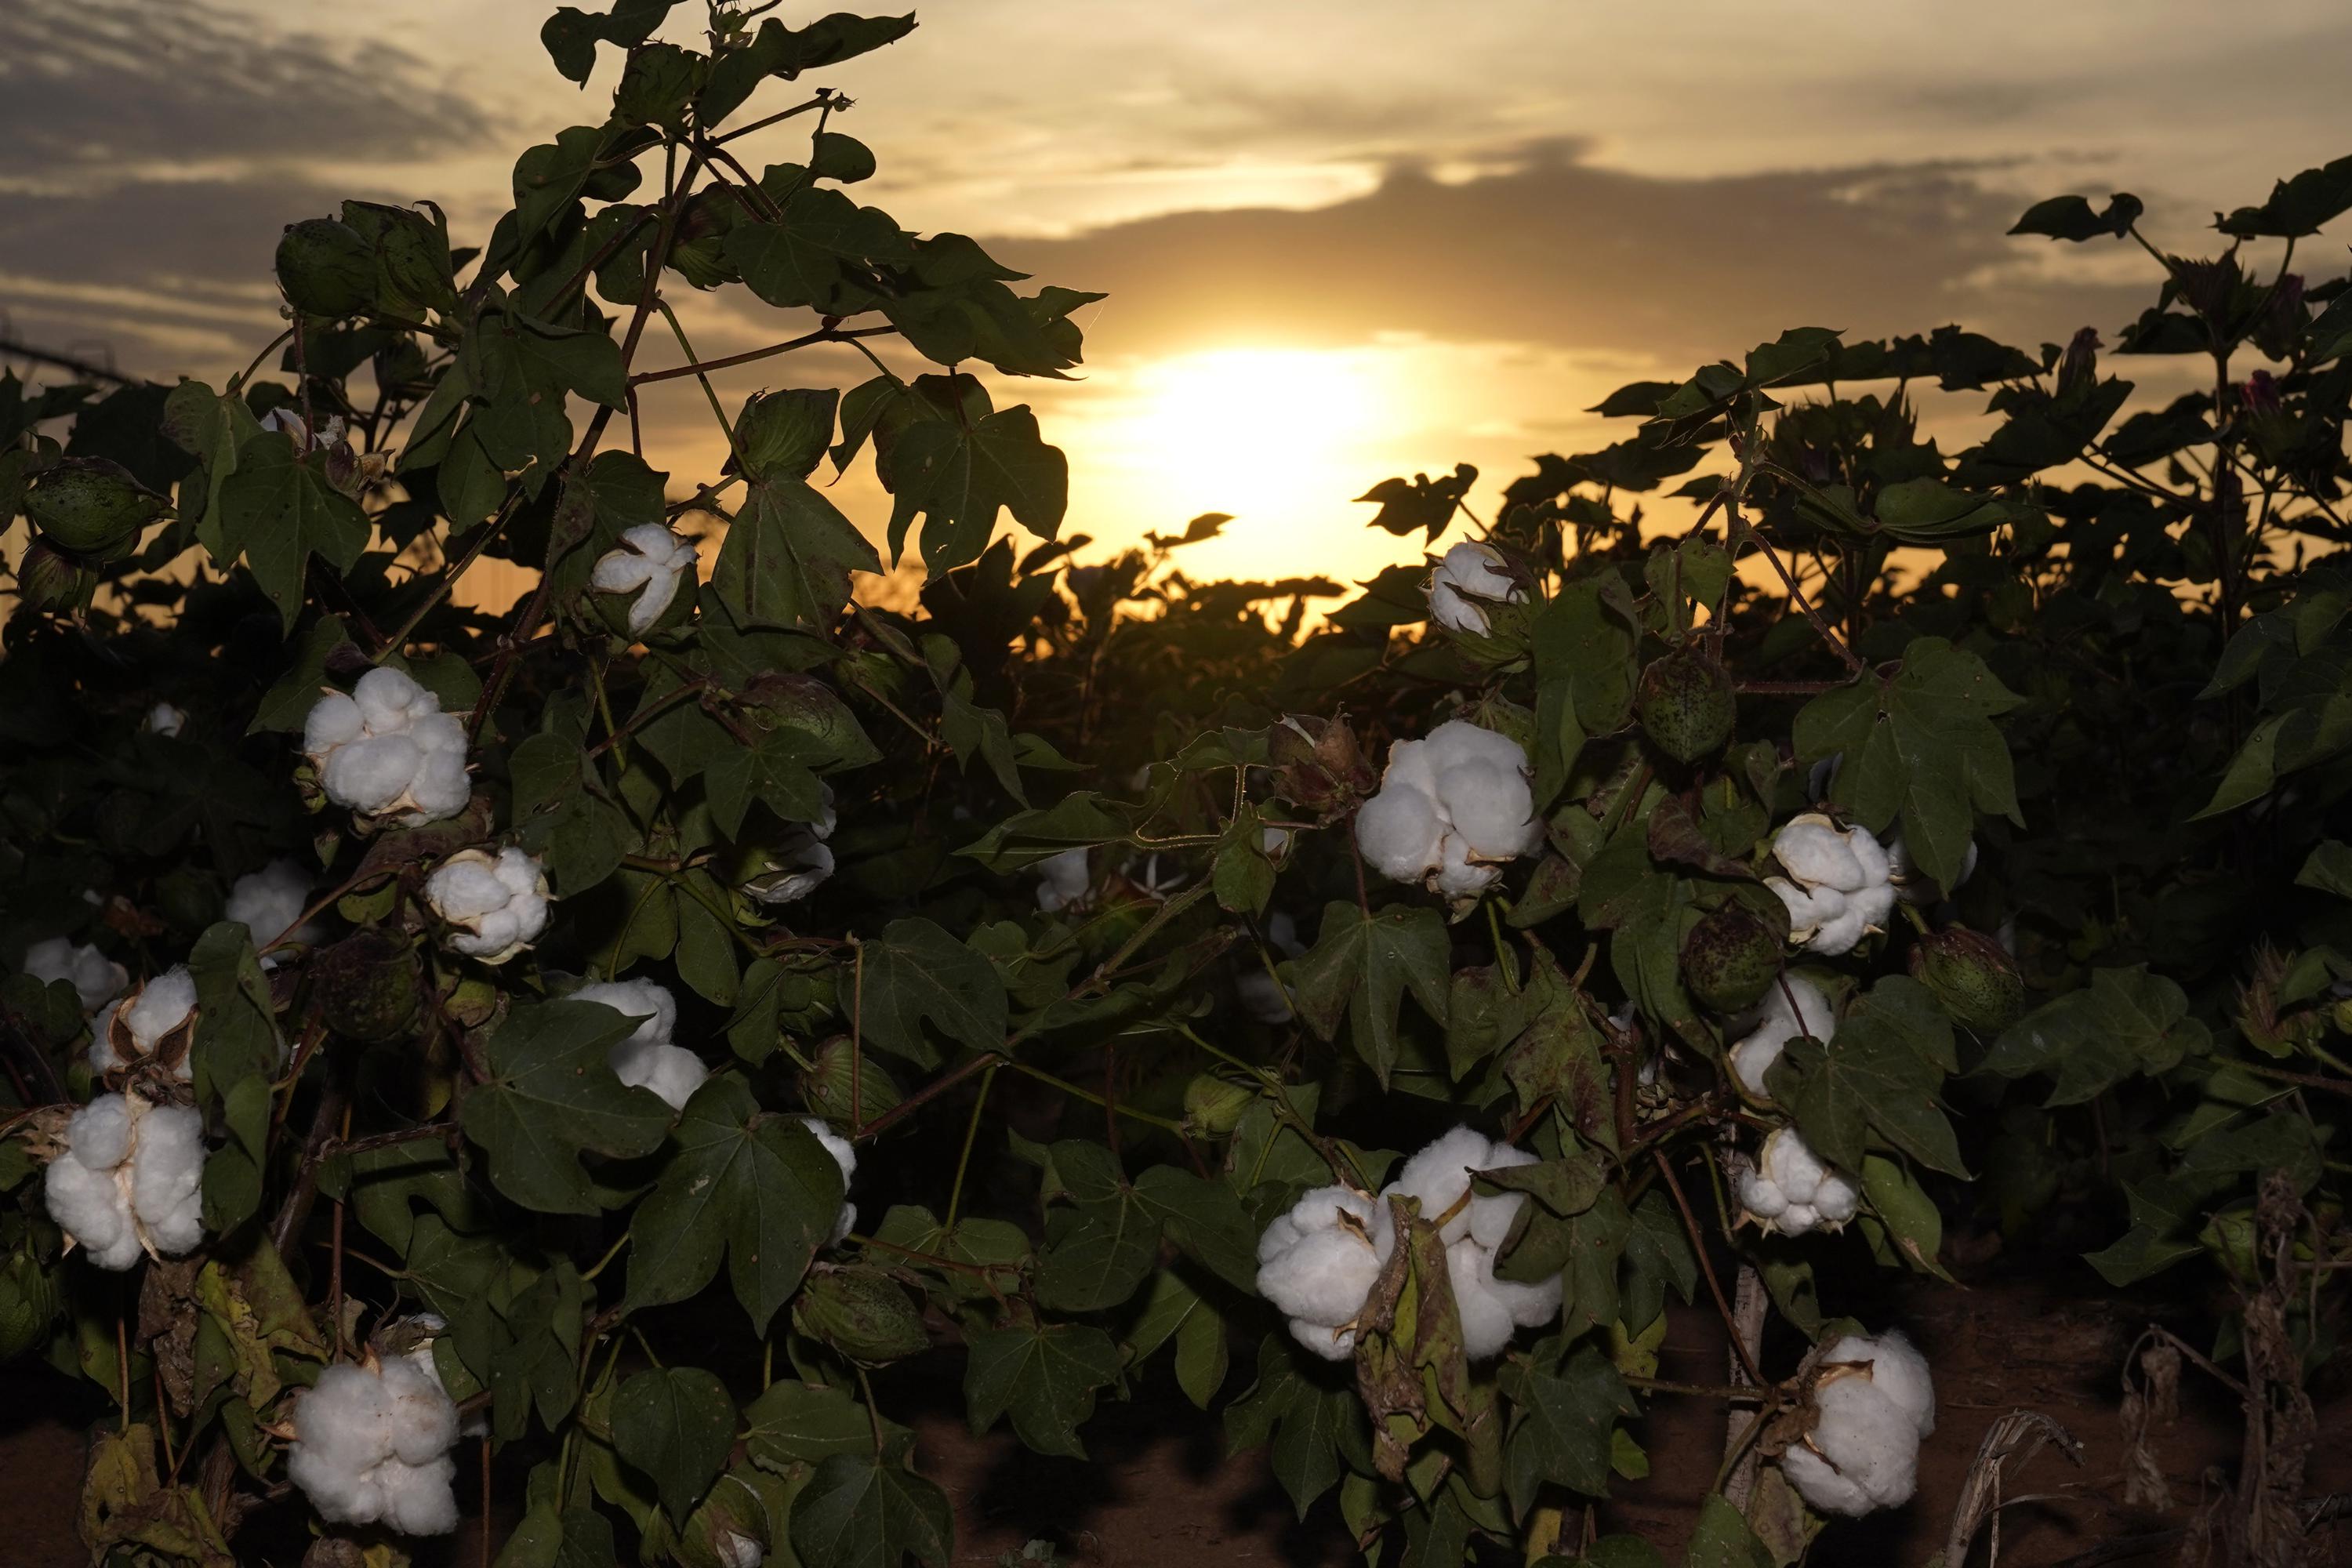 Smallest U.S. cotton crop in 13 years due to drought